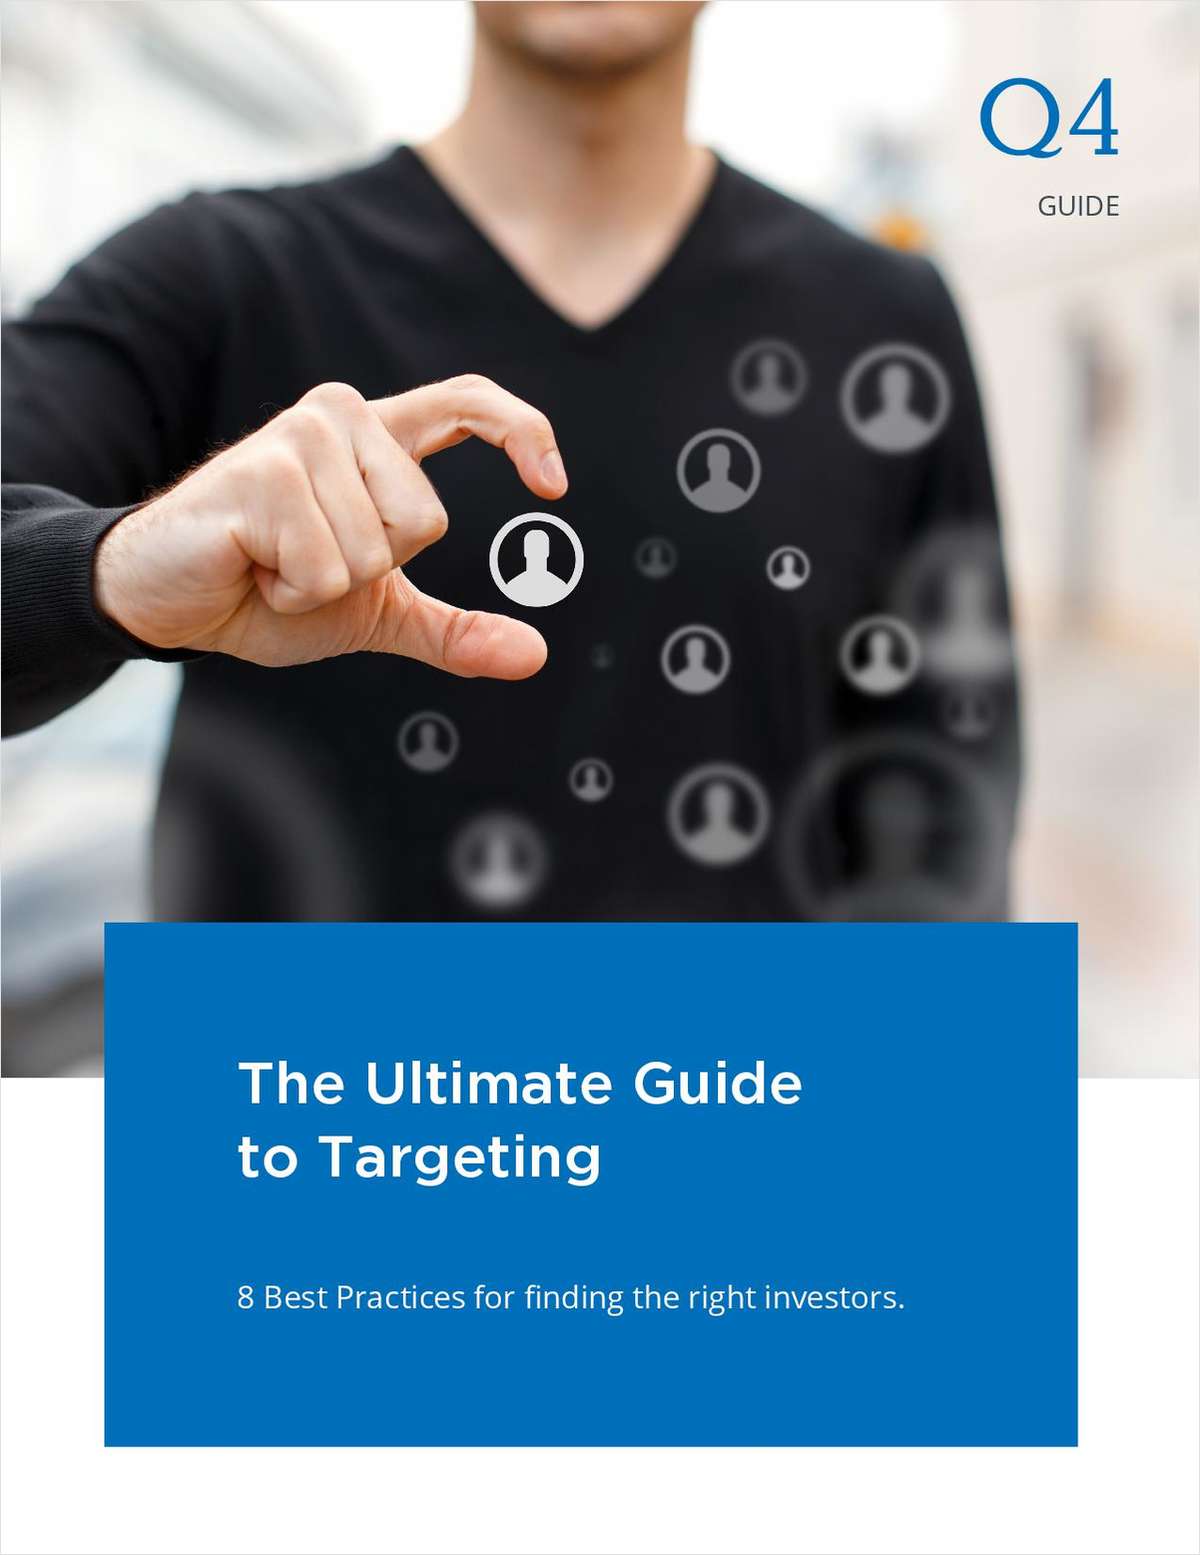 The Ultimate Guide to Targeting.